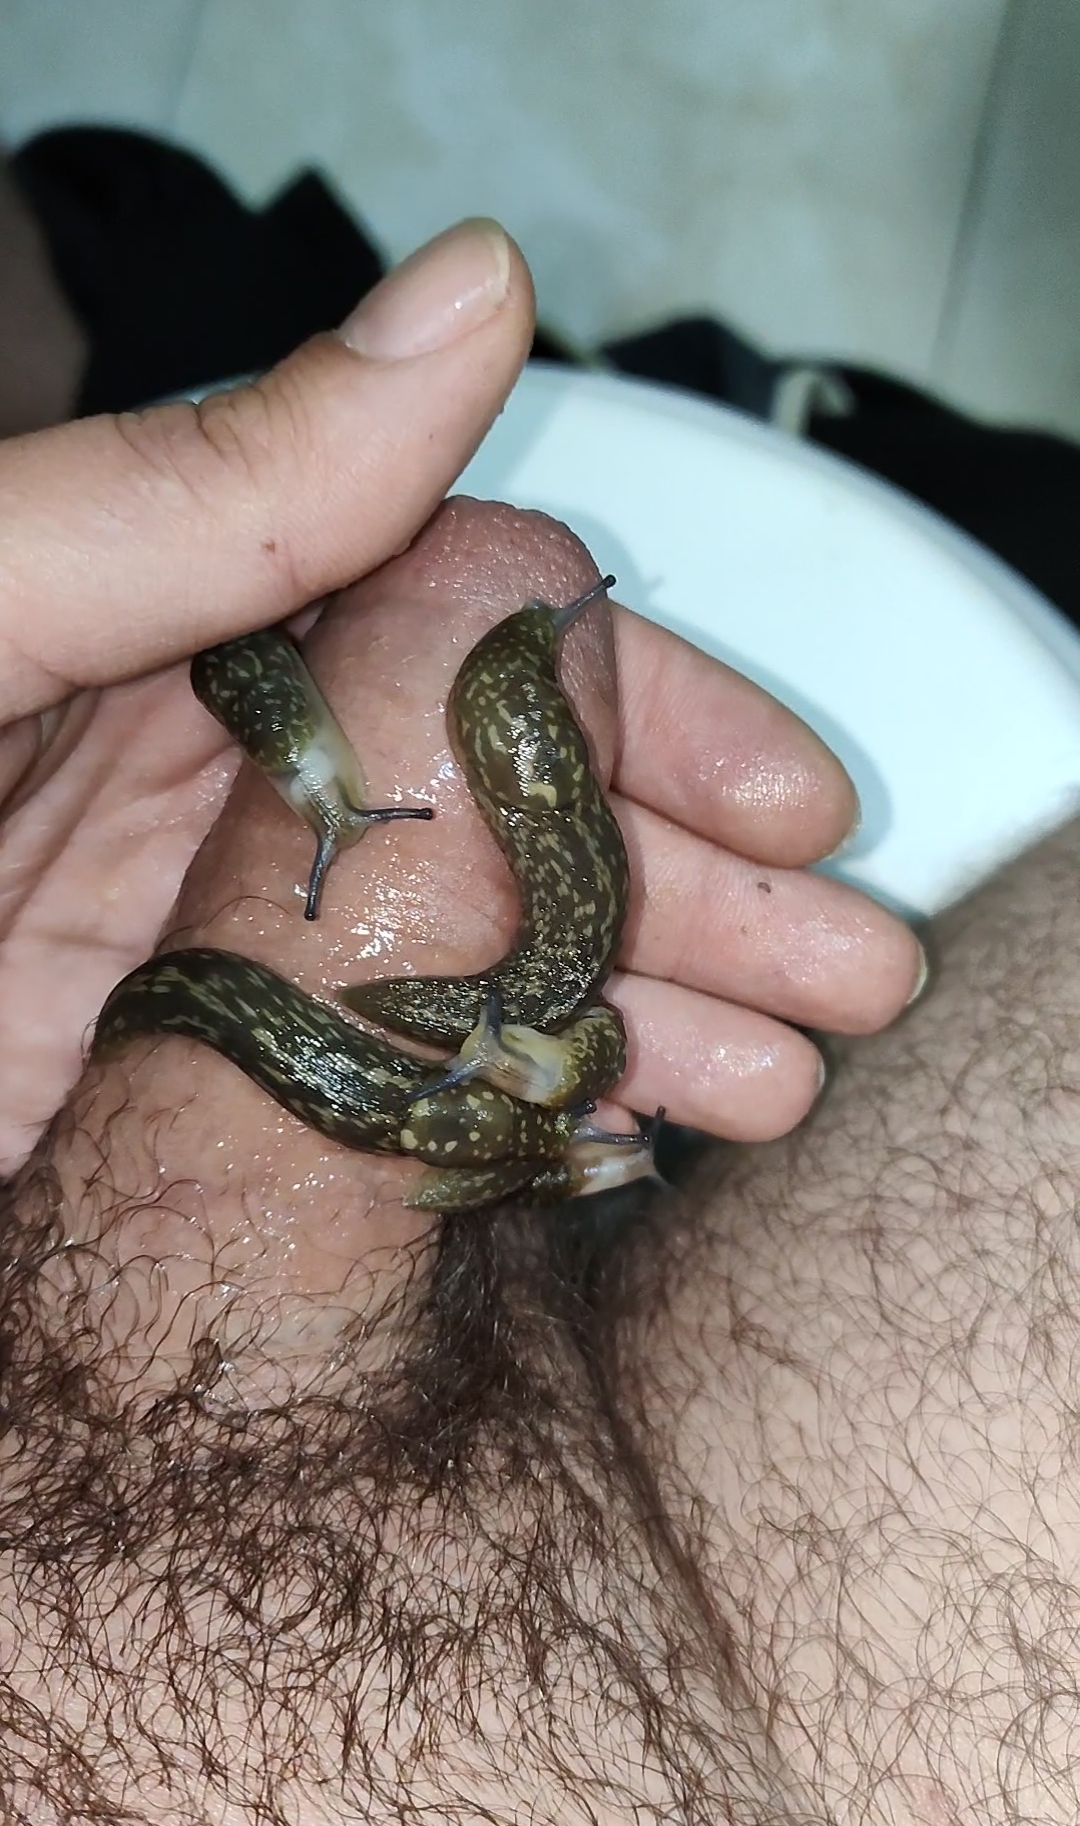 All slugs on my cock and cum